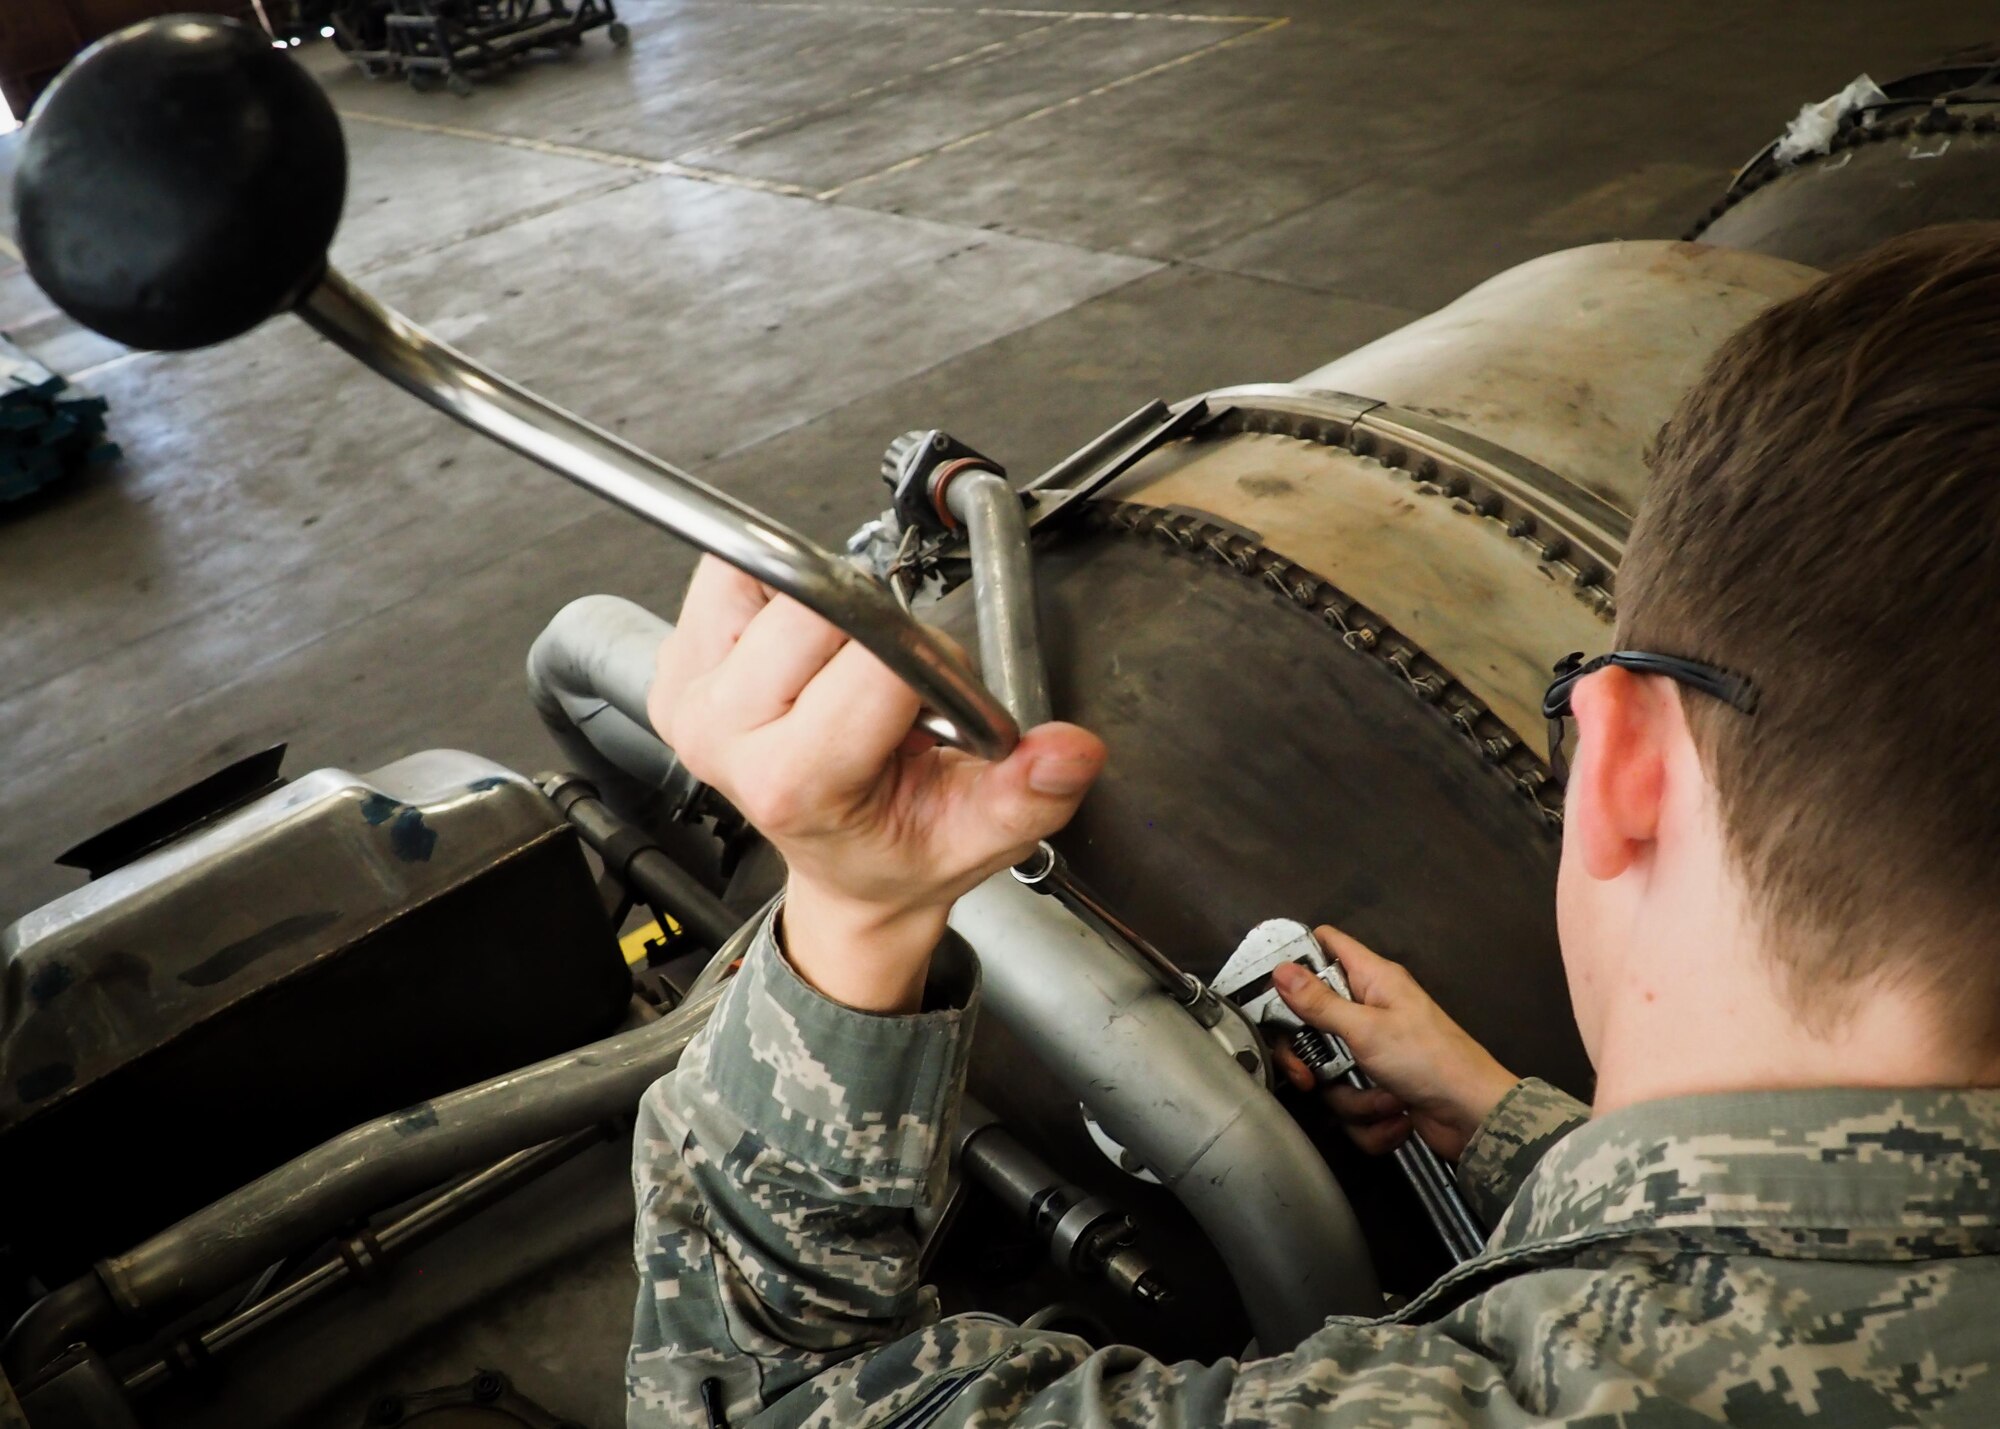 Senior Airman Jovie Abaya, 96th Aircraft Maintenance Unit aerospace propulsion technician, fastens a speed handle into a sized socket at Barksdale Air Force Base, La., June 22, 2016. Propulsion technicians train to provide on-site flightline maintenance to aircraft at a moment’s notice and have access to a variety of toolkits with the capability to repair most issues. (U.S. Air Force photo/Senior Airman Mozer O. Da Cunha)